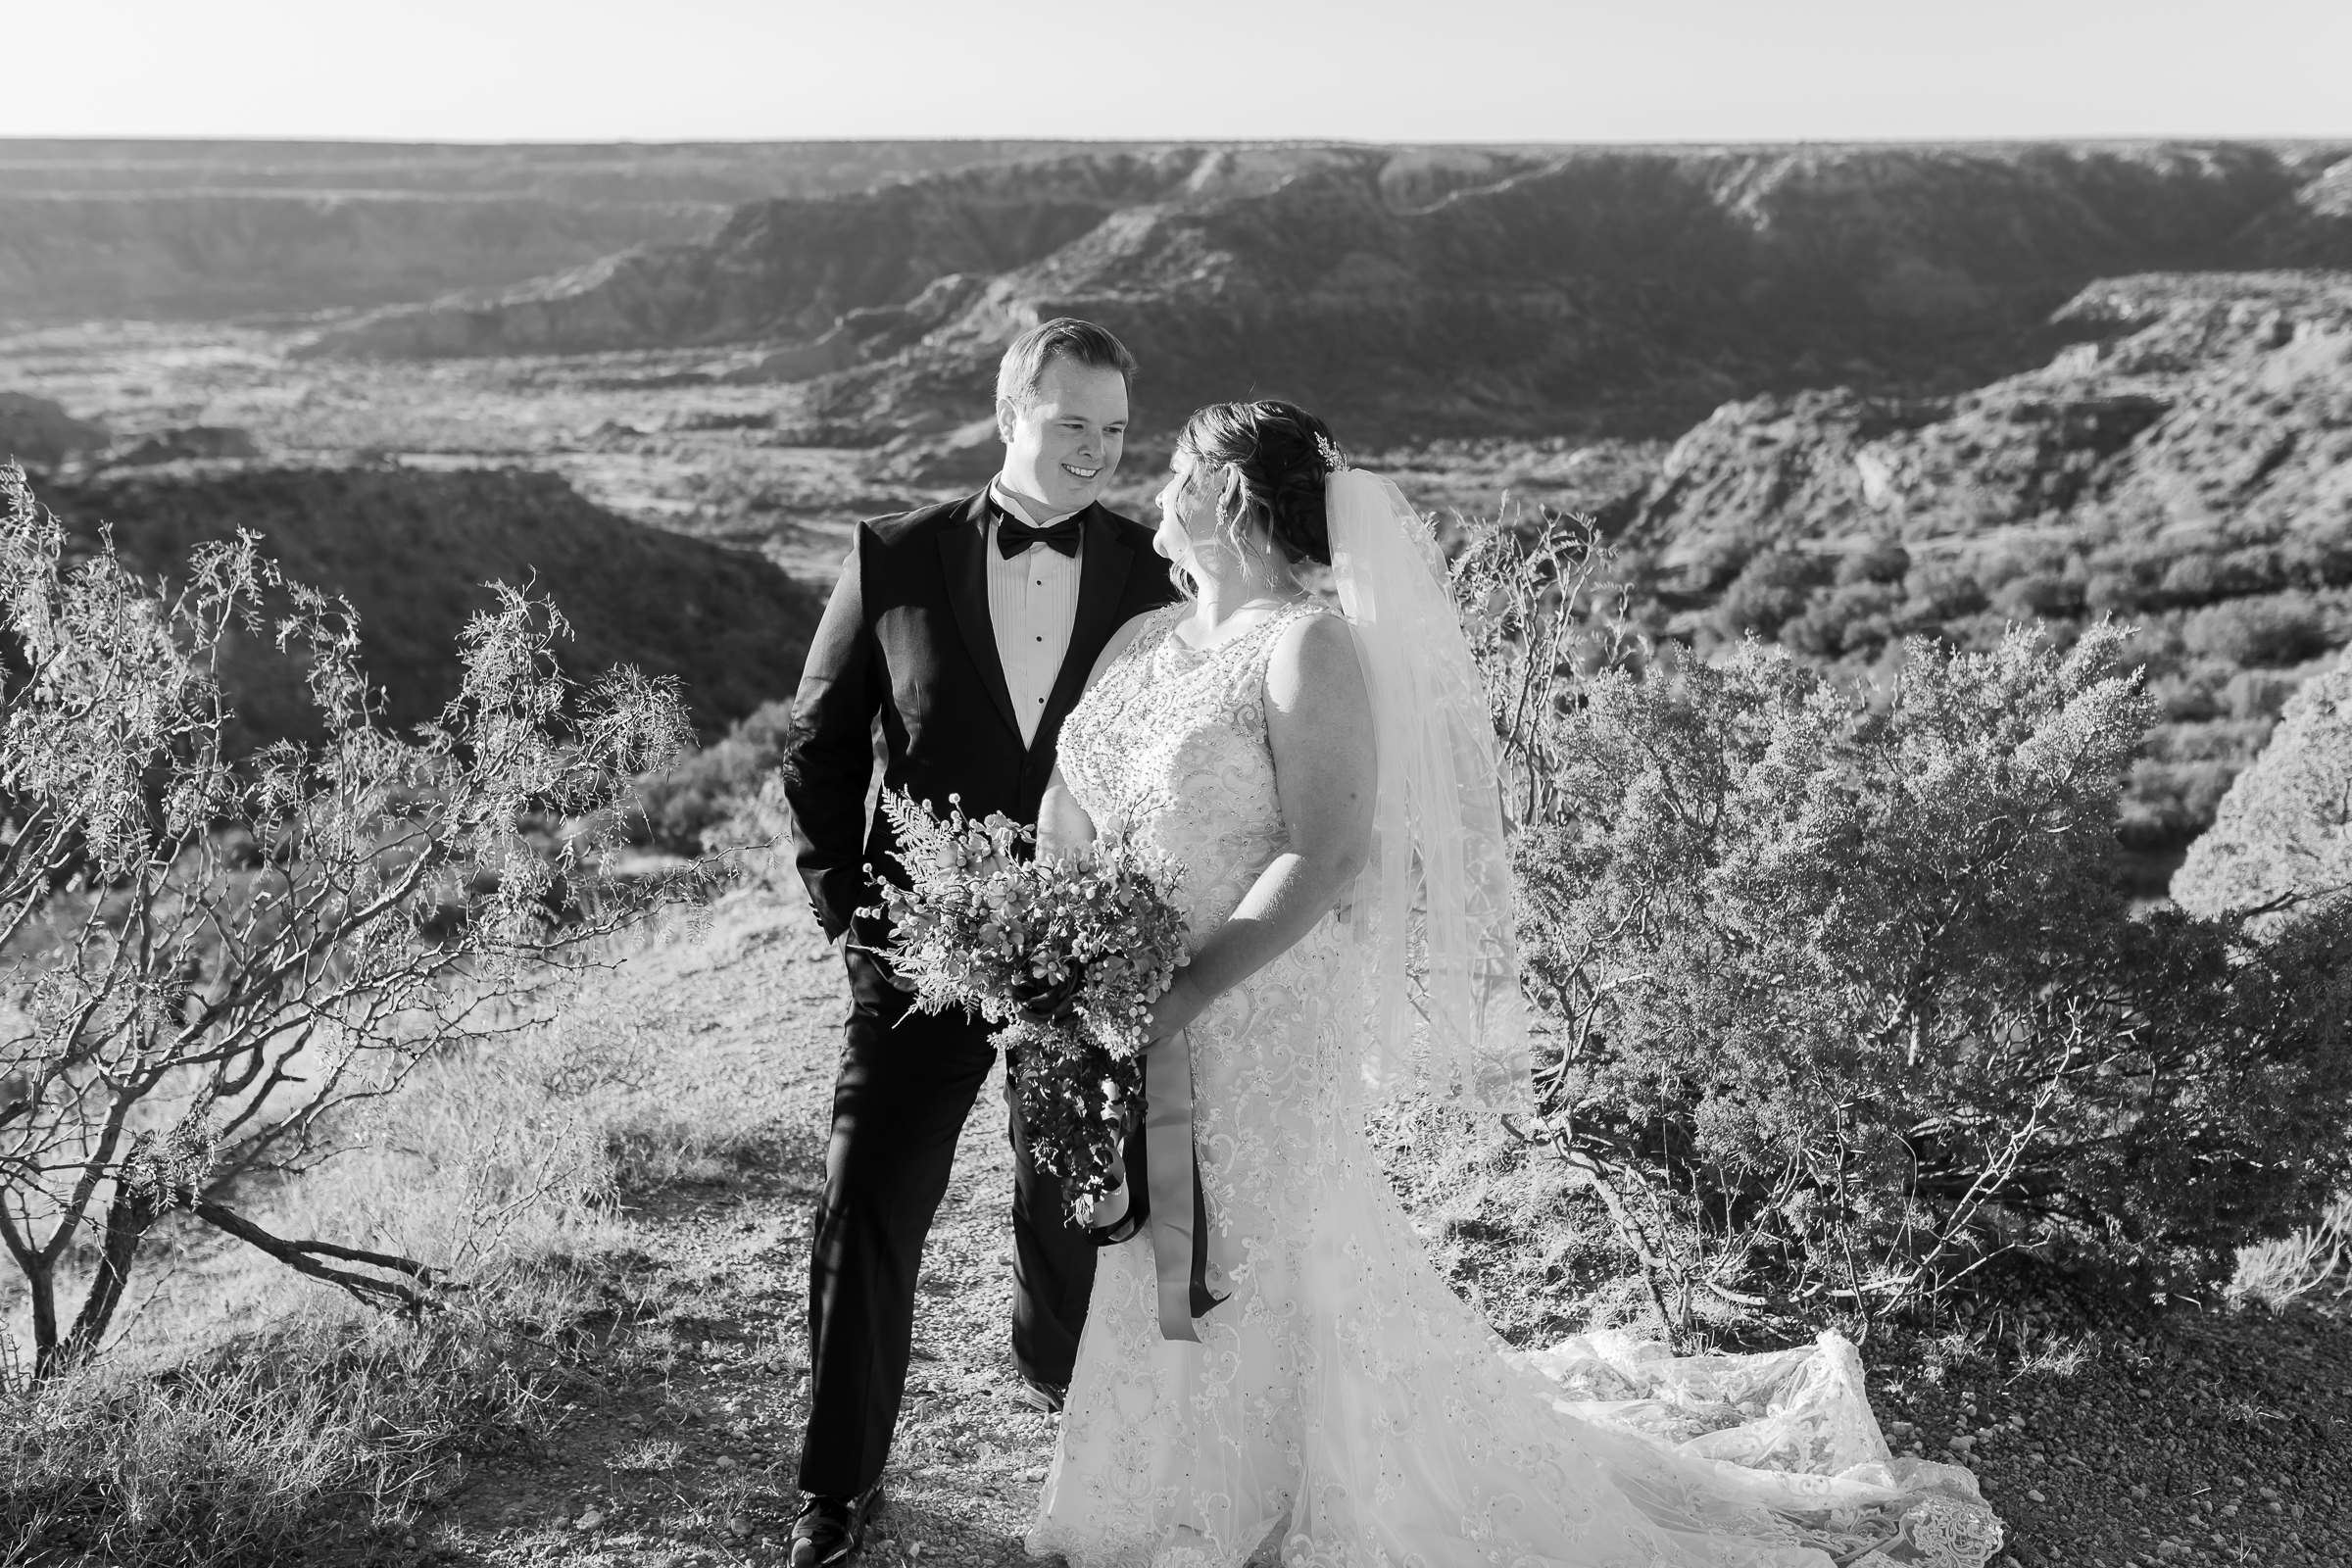 The best place for a hiking Elopement in Texas is Palo Duro State Park.